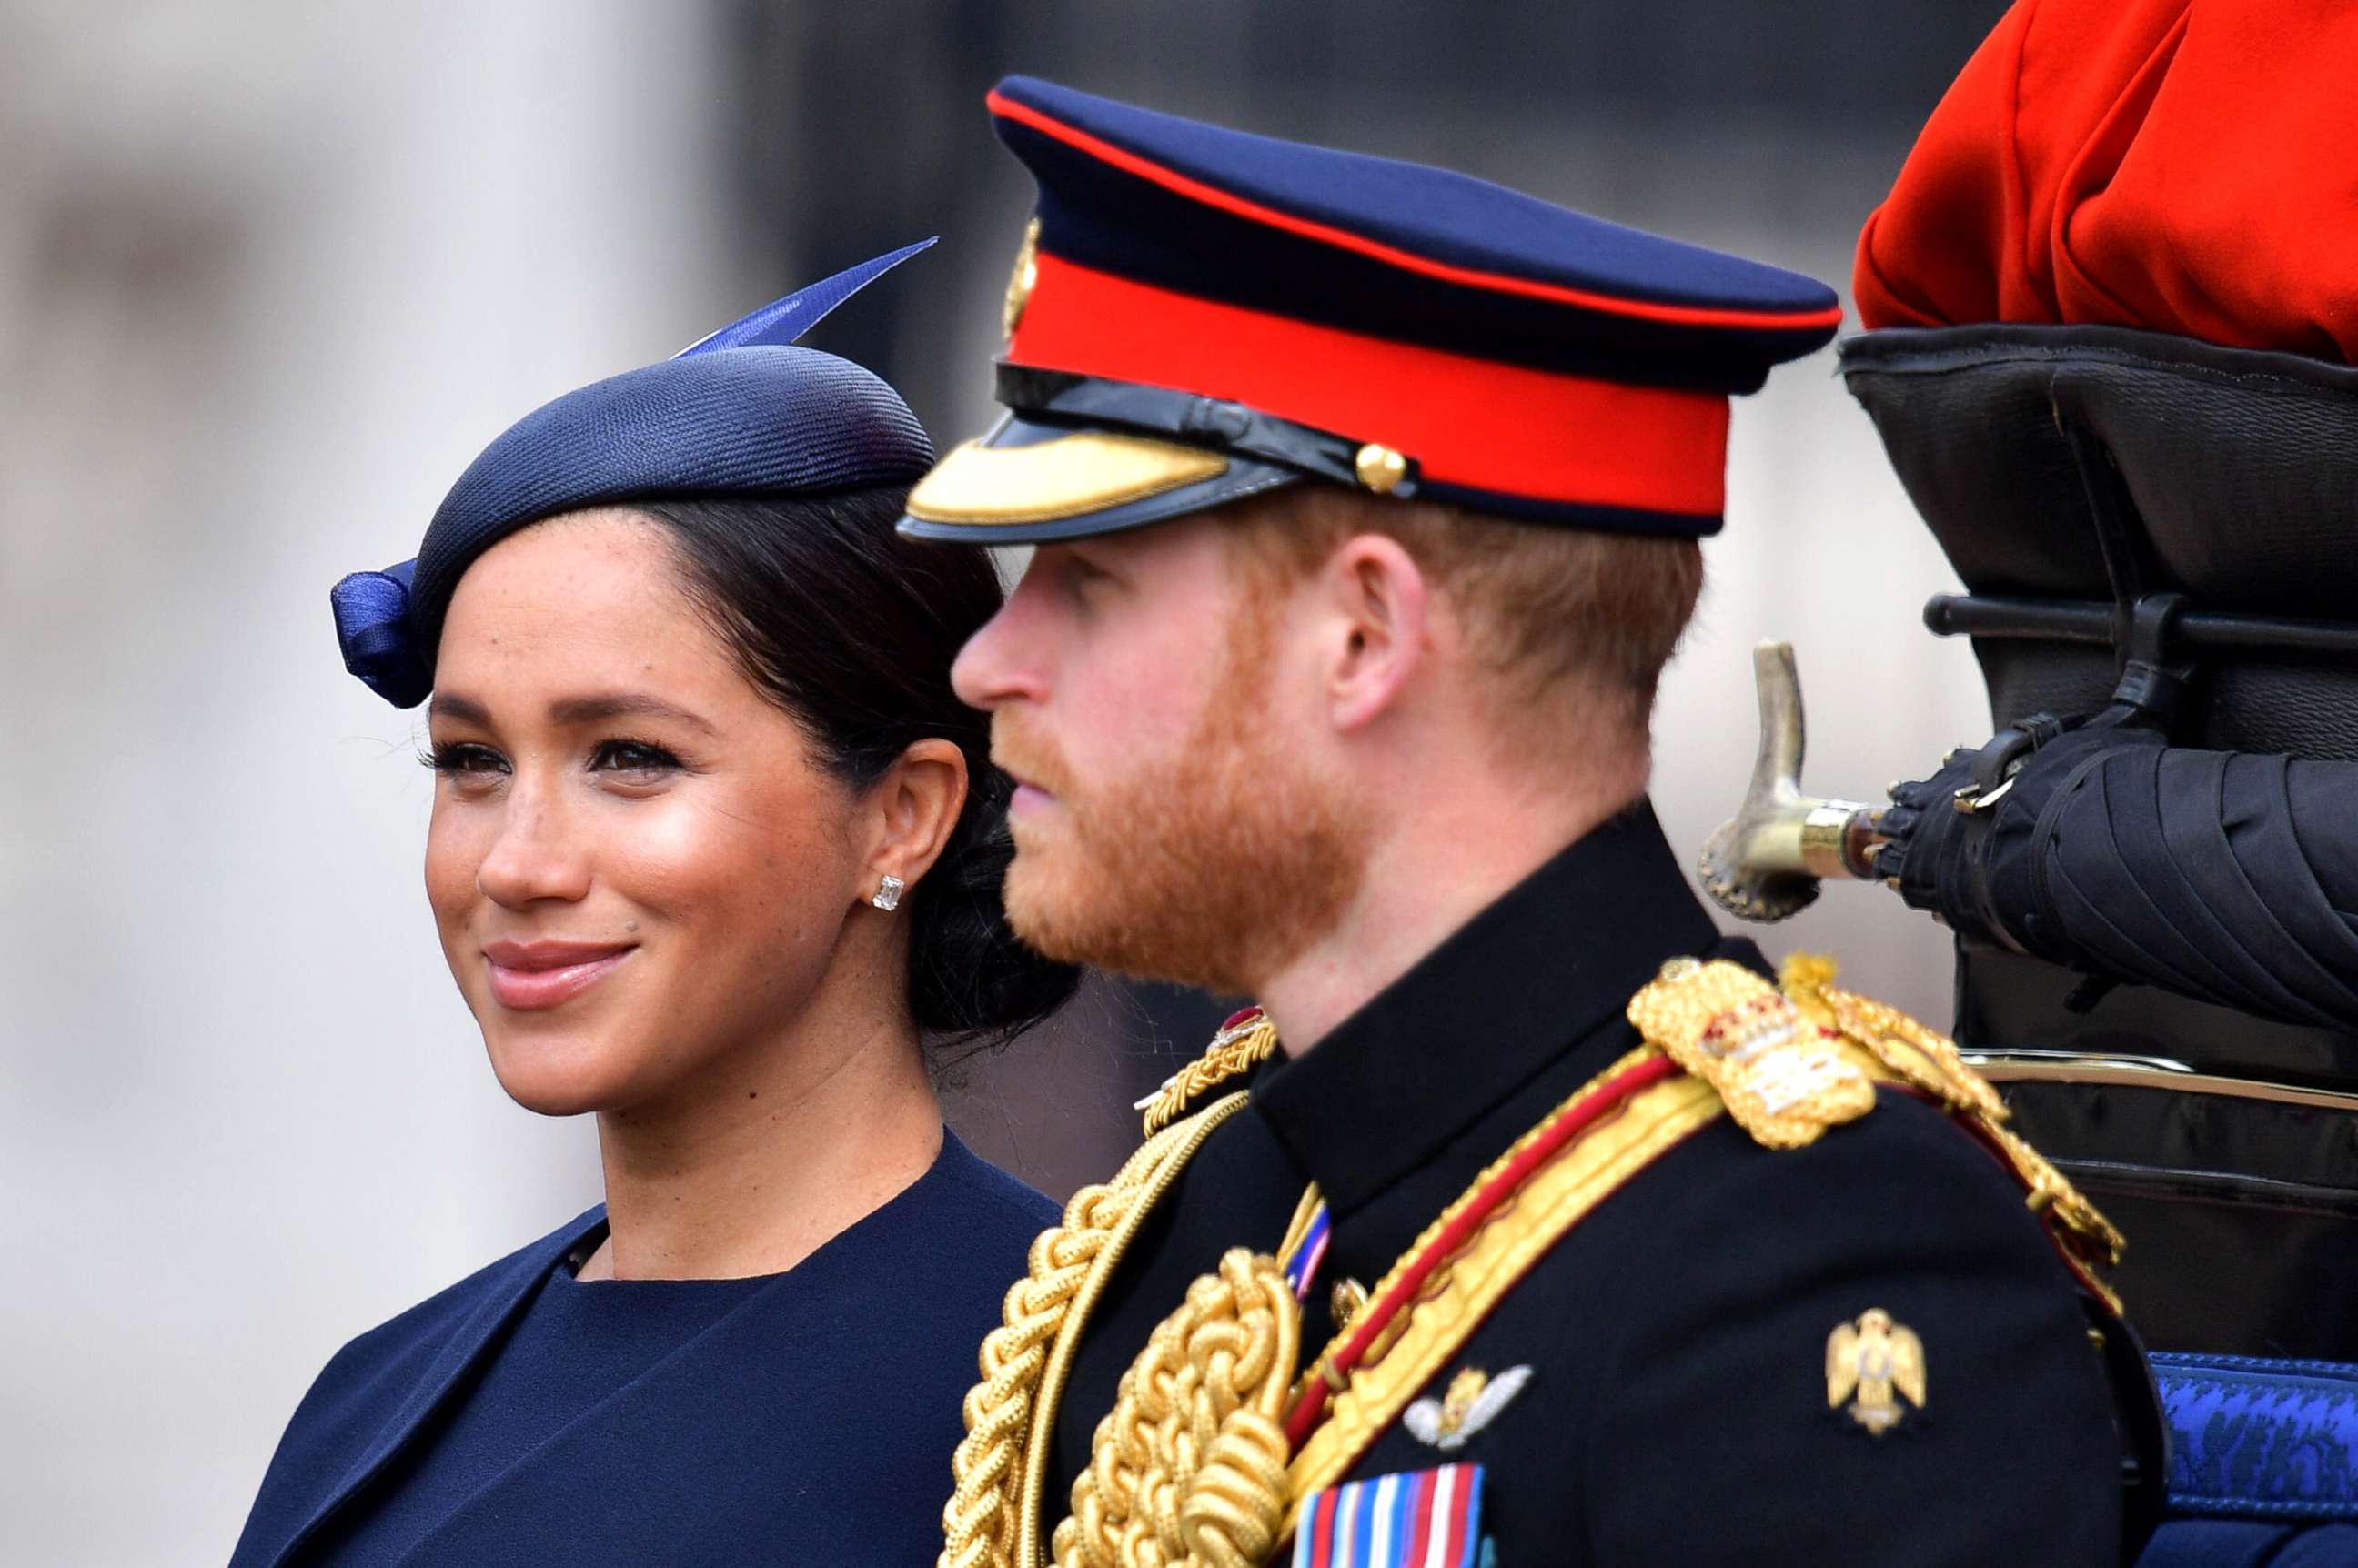 PHOTO: Meghan, Duchess of Sussex and Prince Harry, Duke of Sussex make their way in a horse drawn carriage to Horseguards parade ahead of the Queen's Birthday Parade, Trooping the Colour, in London, June 8, 2019.